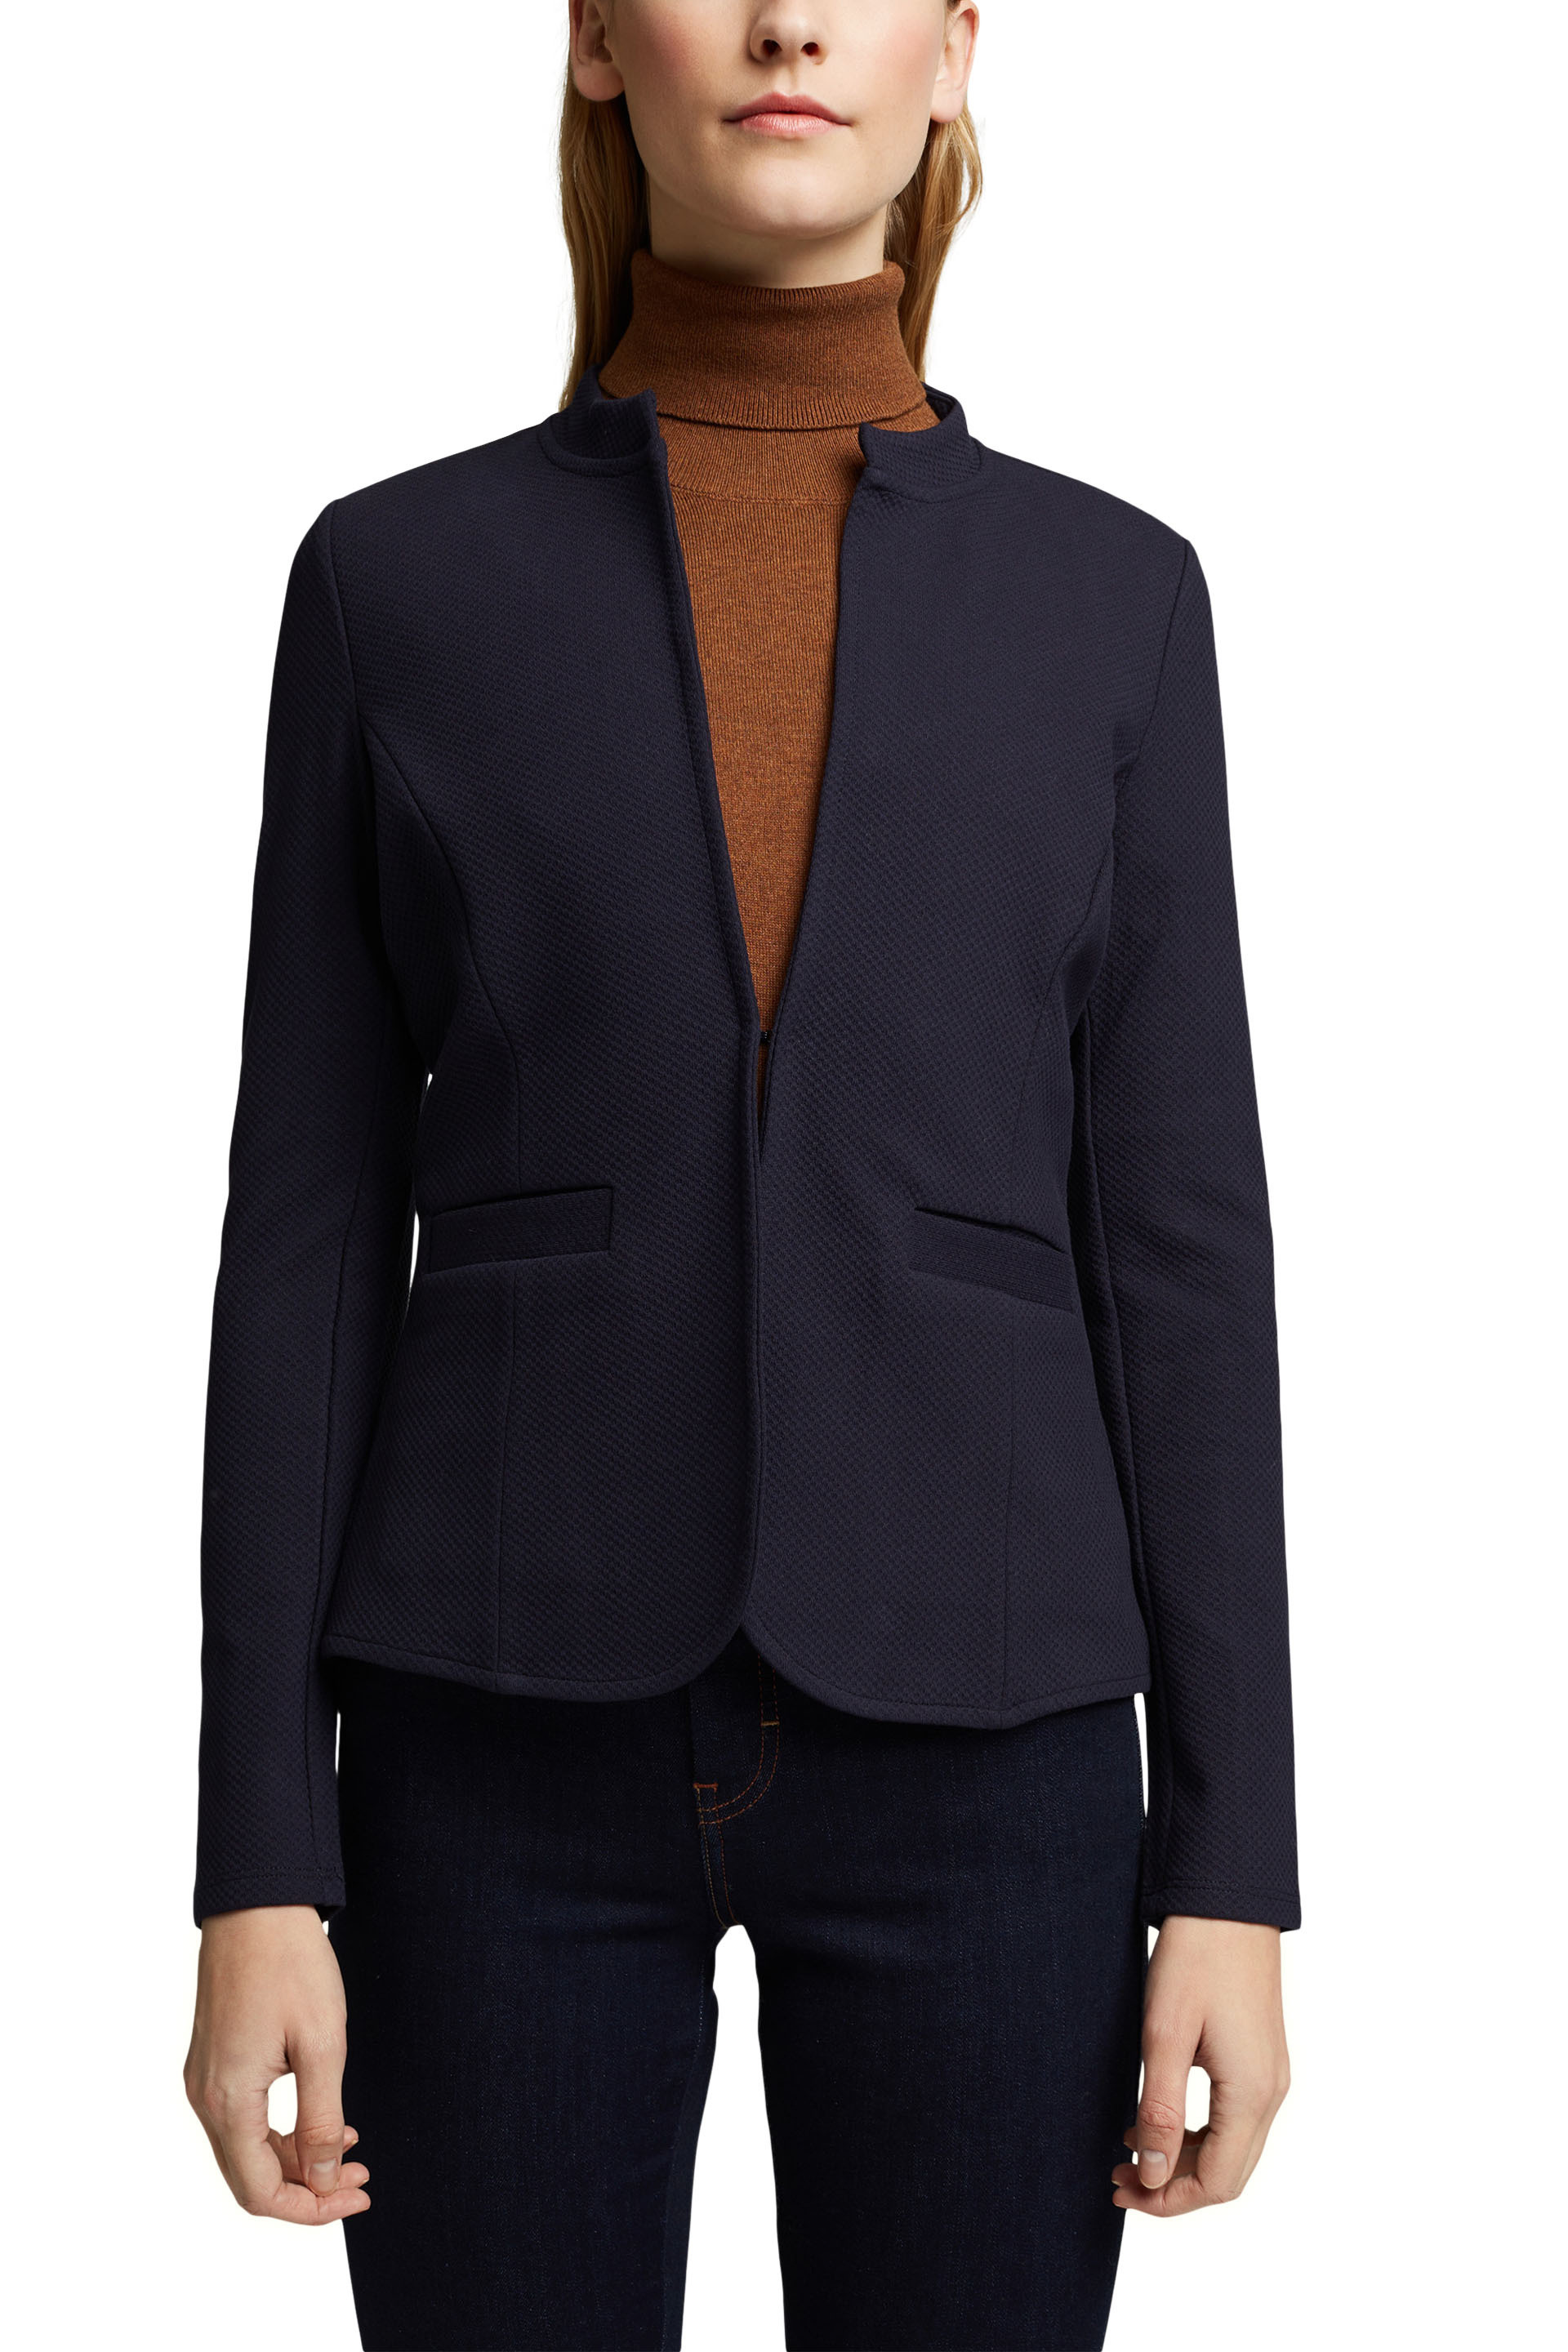 Blazer sciancrato in jersey, Blu, large image number 1